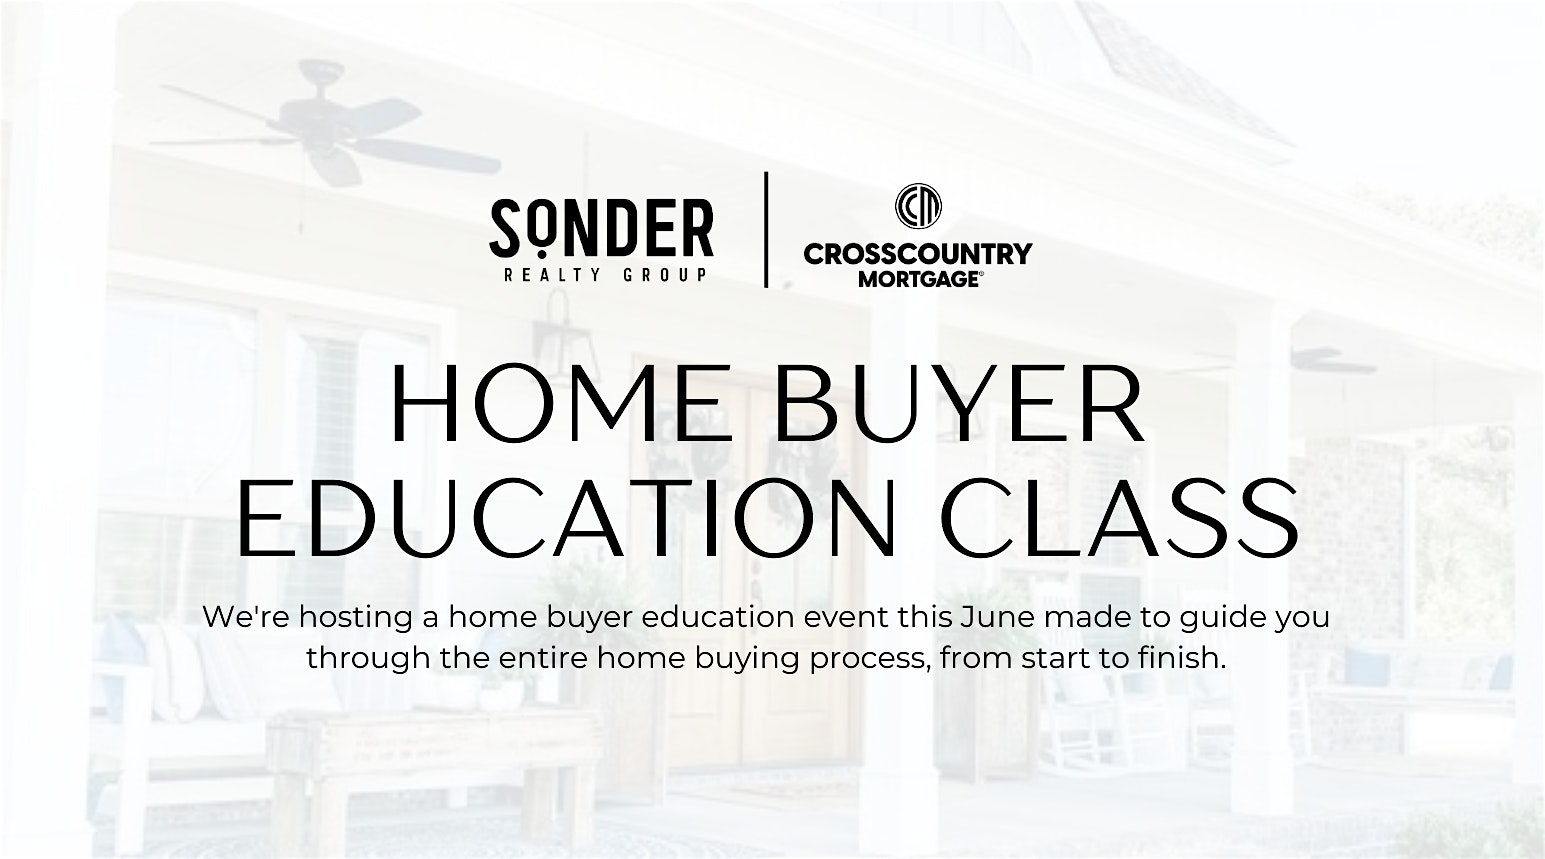 Home Buyer Education Class